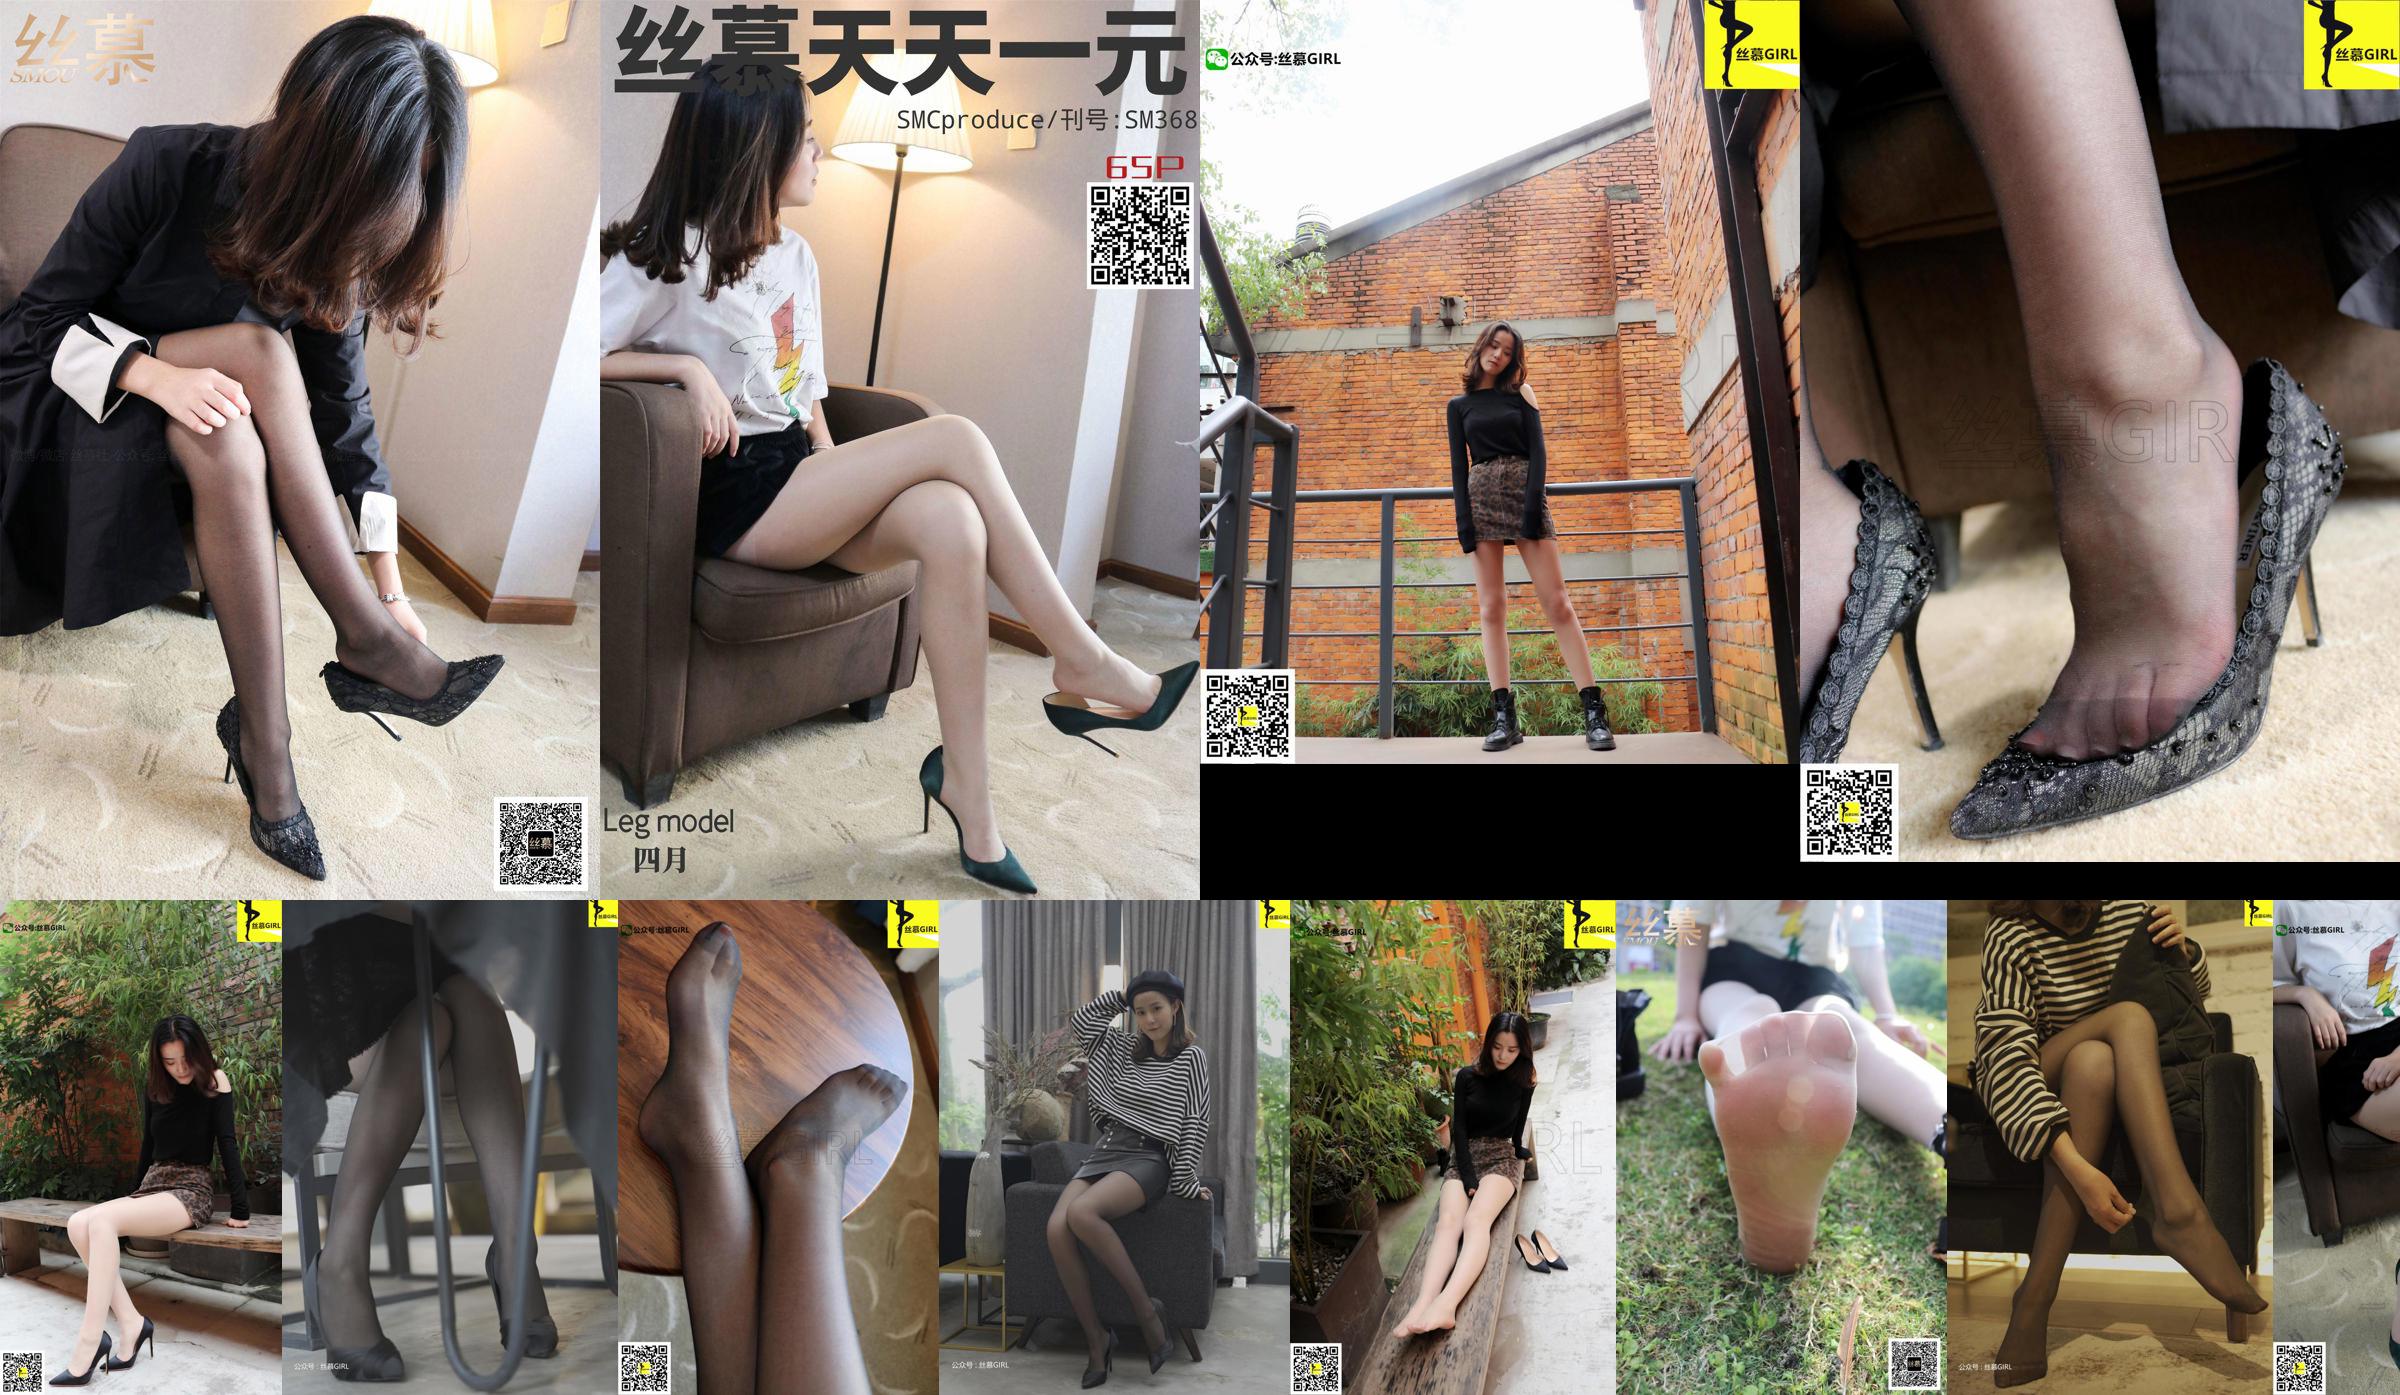 [Simu] SM368 Every Day One Yuan April "Double Silk Review" No.abc679 Pagina 4